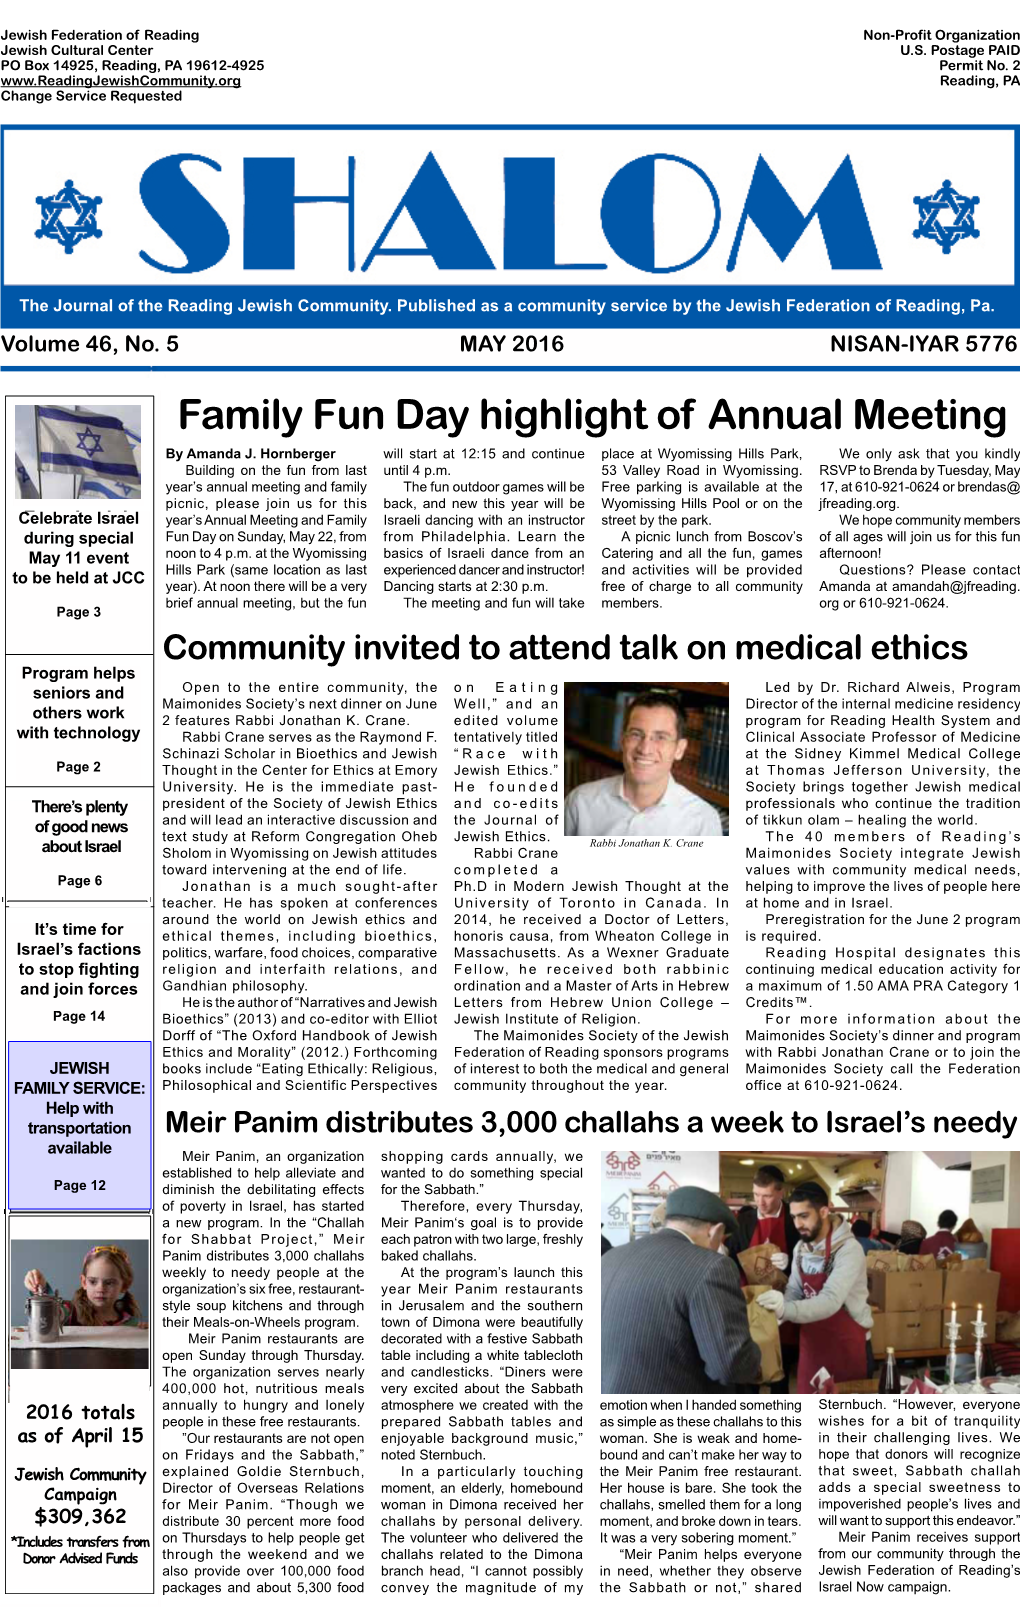 Family Fun Day Highlight of Annual Meeting